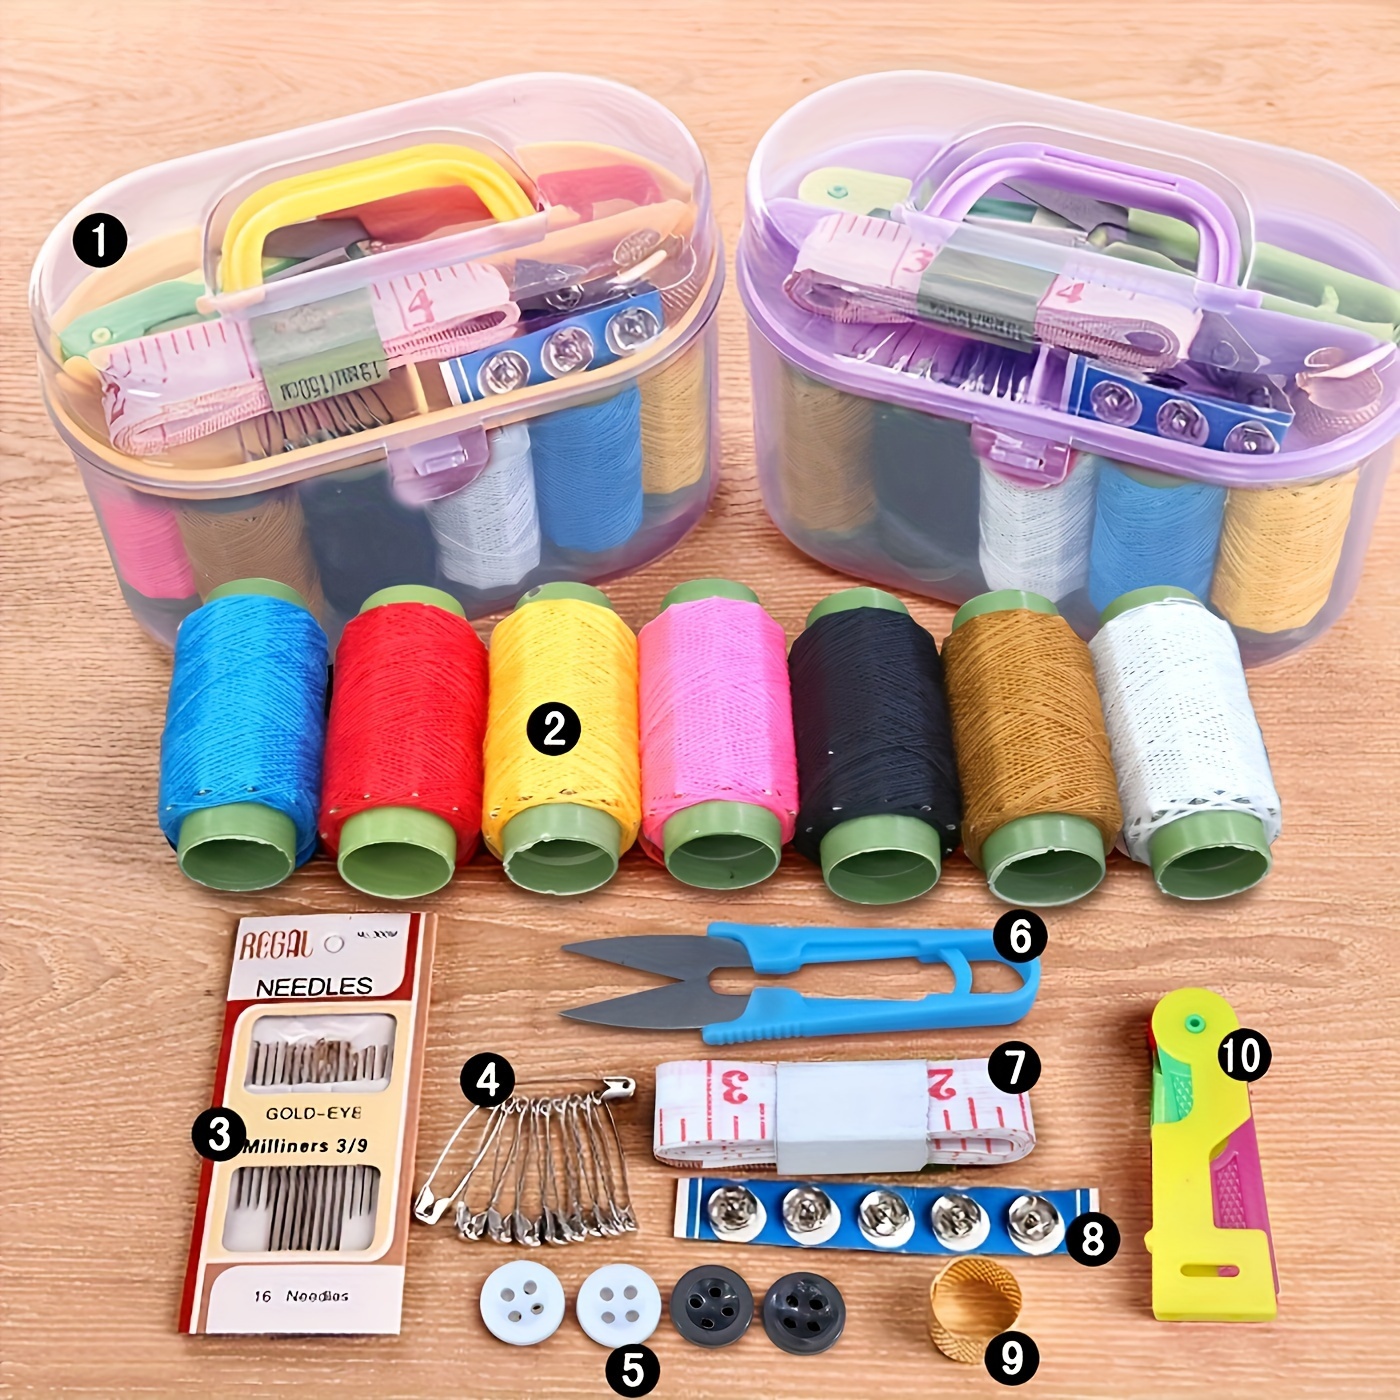 

46-piece Portable Sewing Kit With Case - Complete Needlework Tools Set For Home, Travel & Emergency Repairs - Durable, Multifunctional Craft Supplies Sewing Supplies Accessories Sewing Supplies